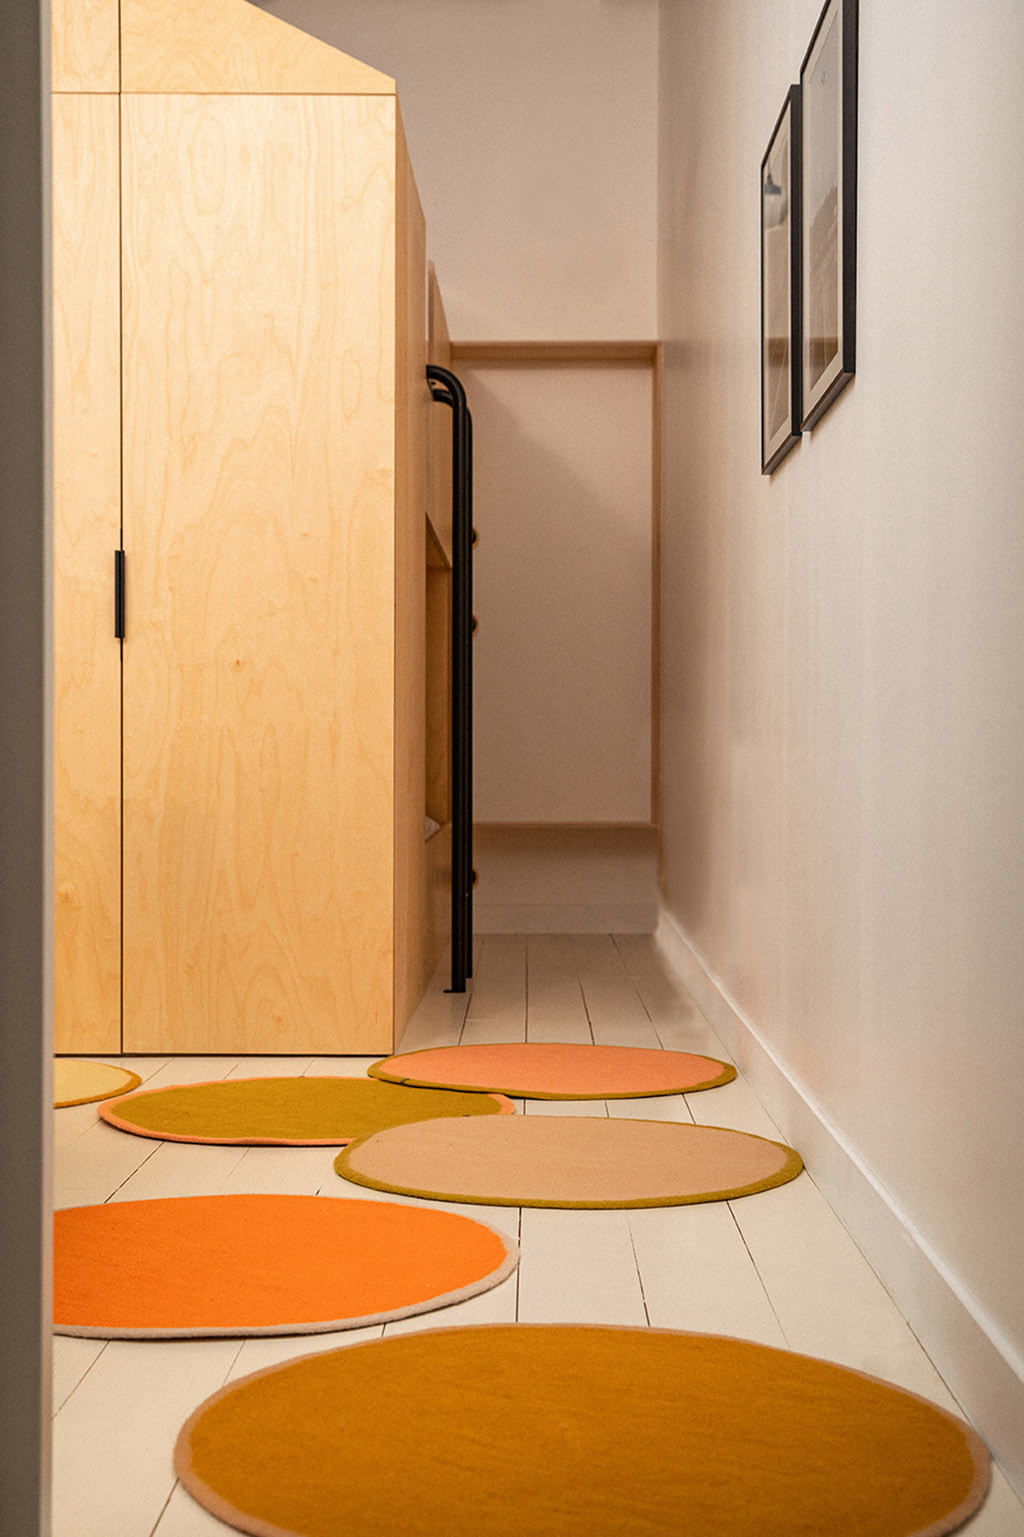 Accumulation of felt rugs with coloured borders to warm up the atmosphere